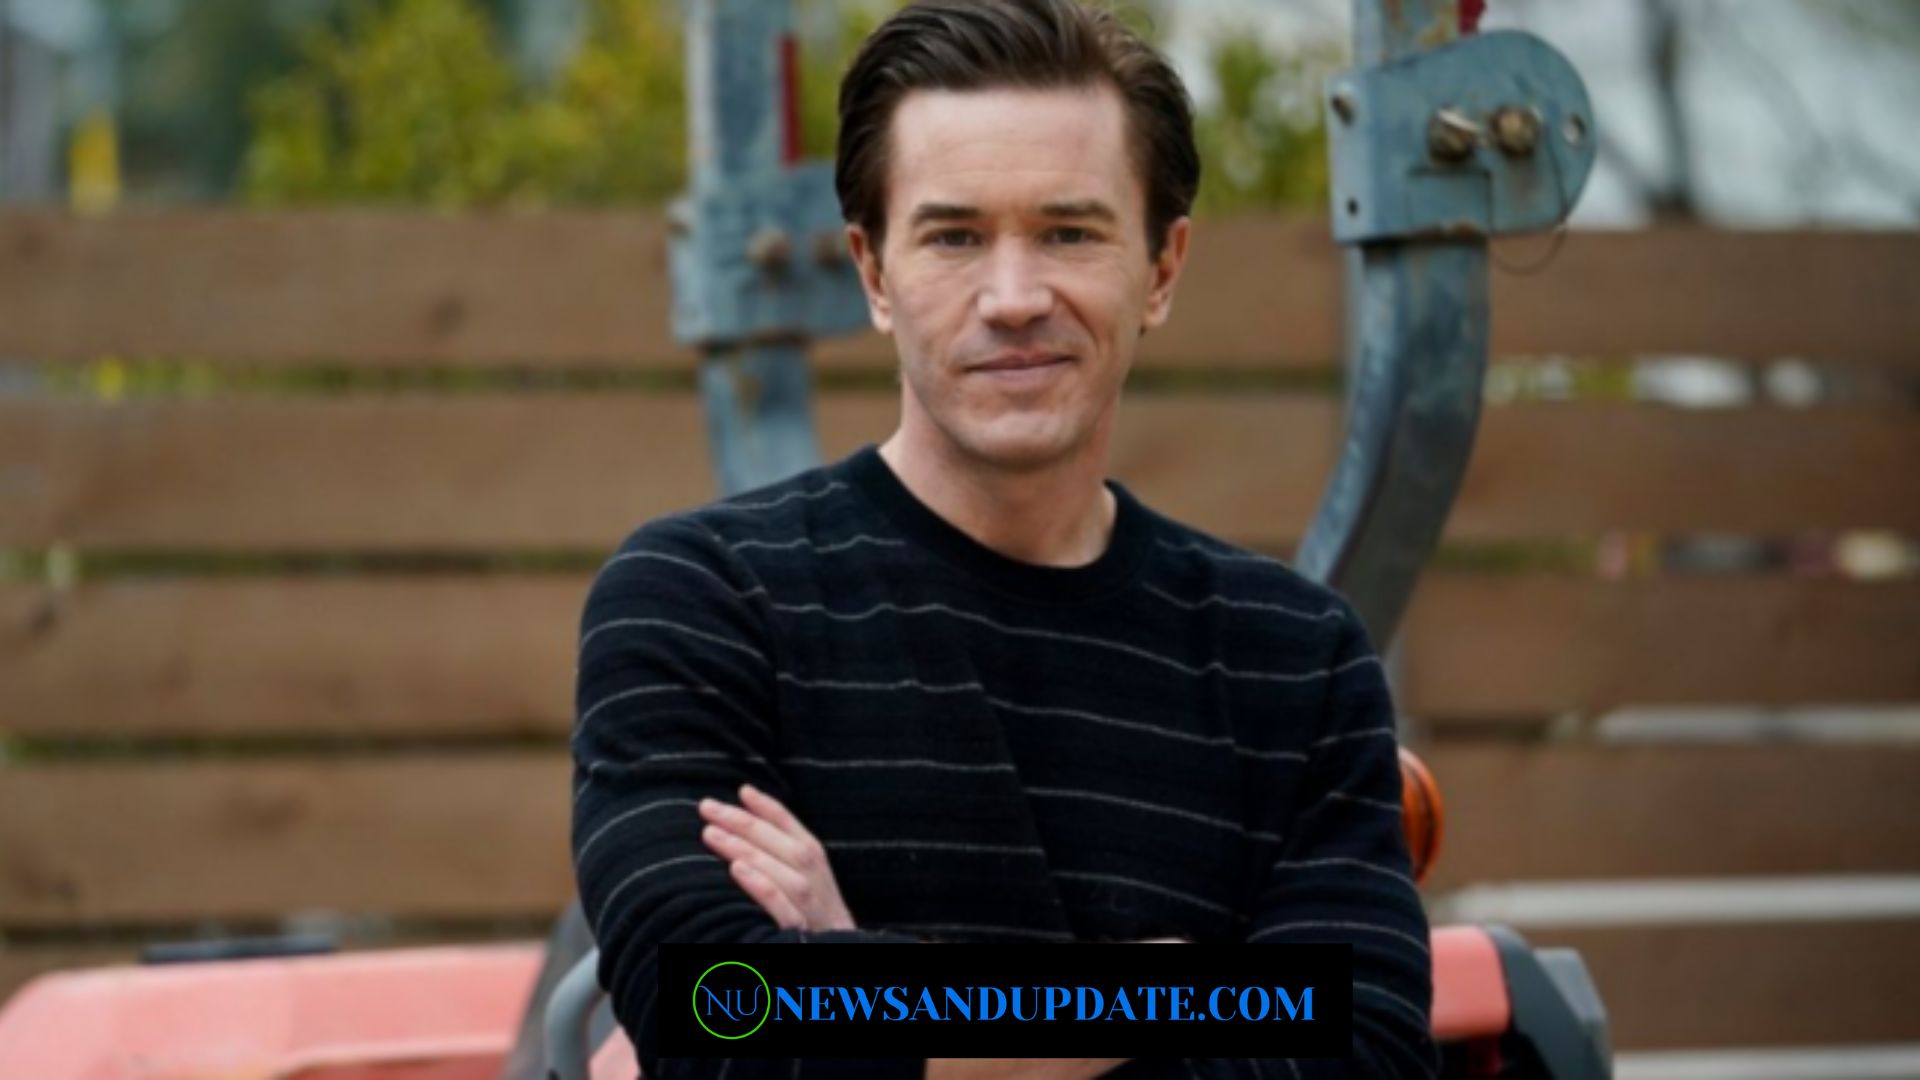 Tom Pelphrey Net Worth In 2022 - Know About Personal And Professional Life!